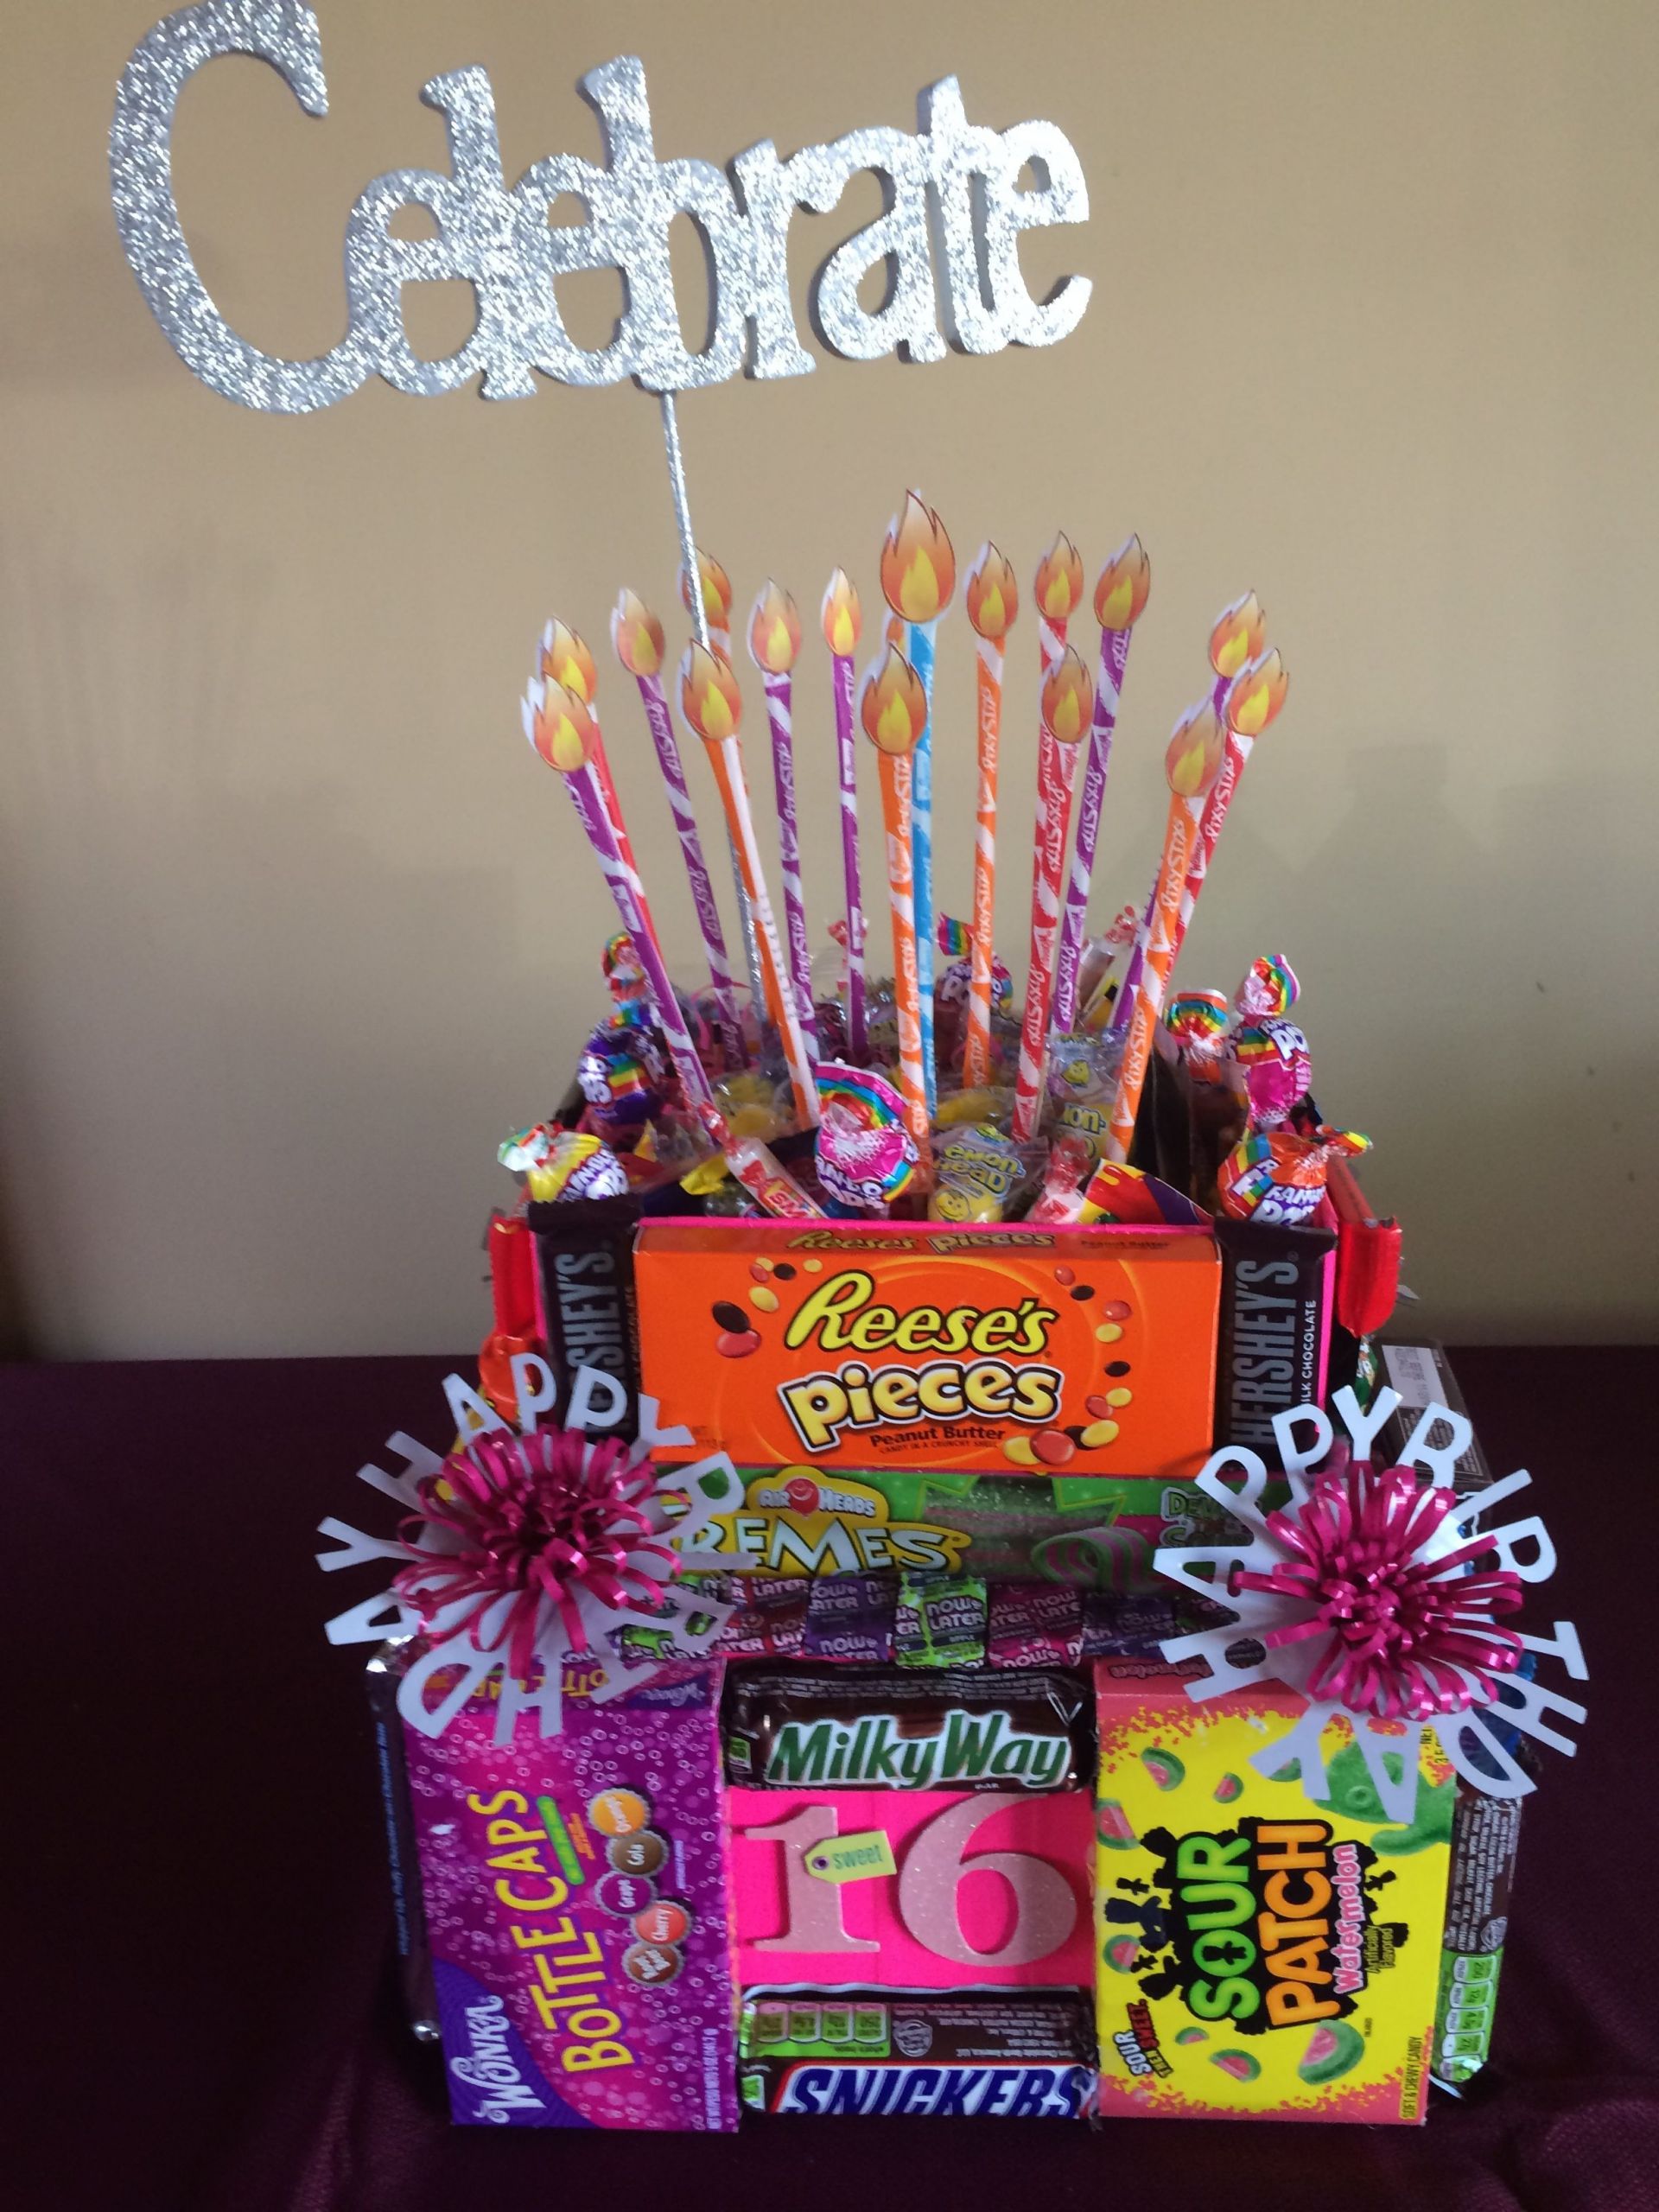 Sweet 16 Gift Basket Ideas
 Candy Bar Cake for Allie s Sweet 16 Birthday